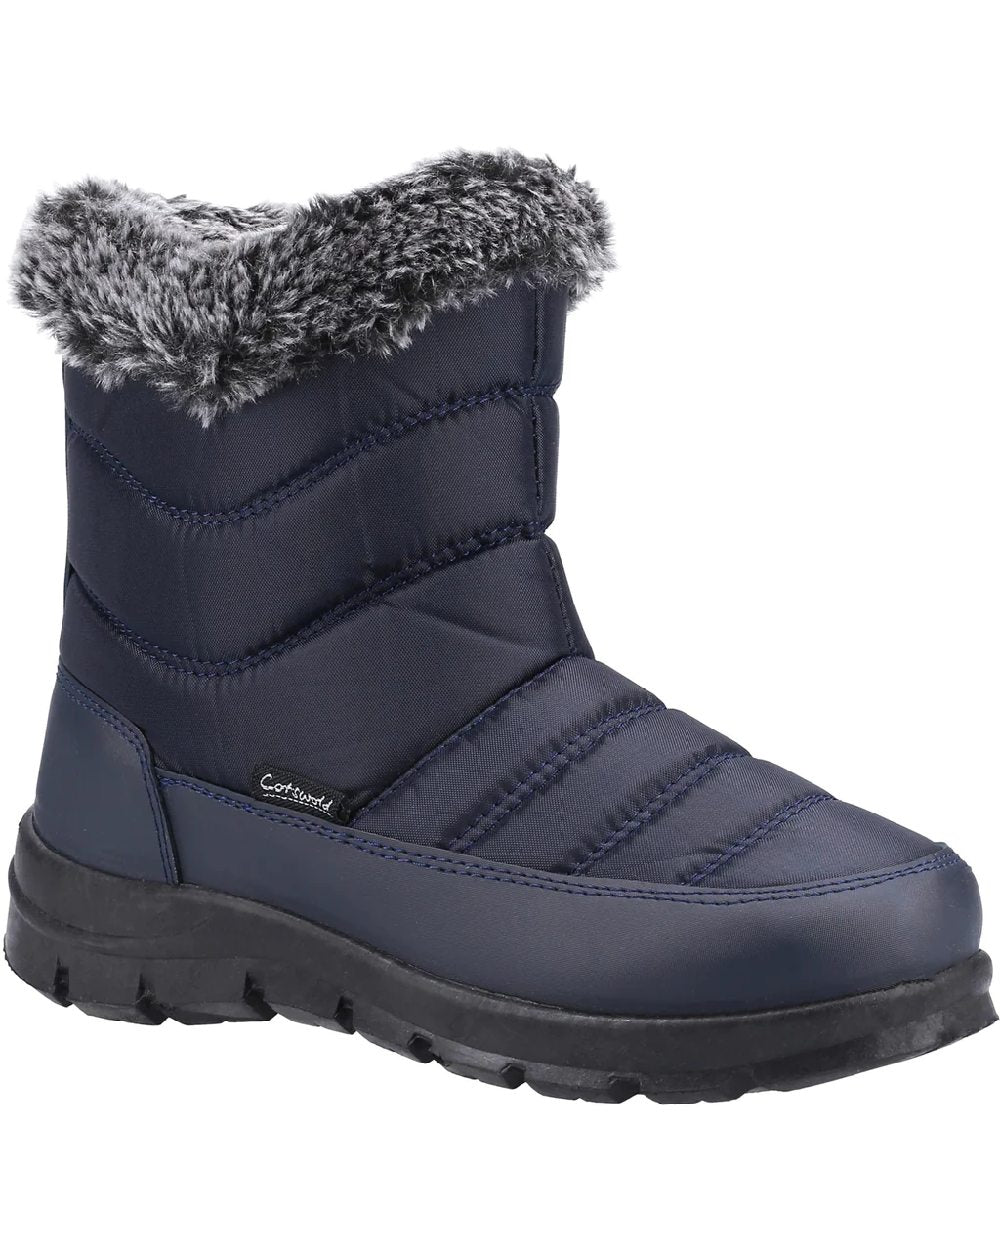 Cotswold Longleat Wellington Boots in Navy 